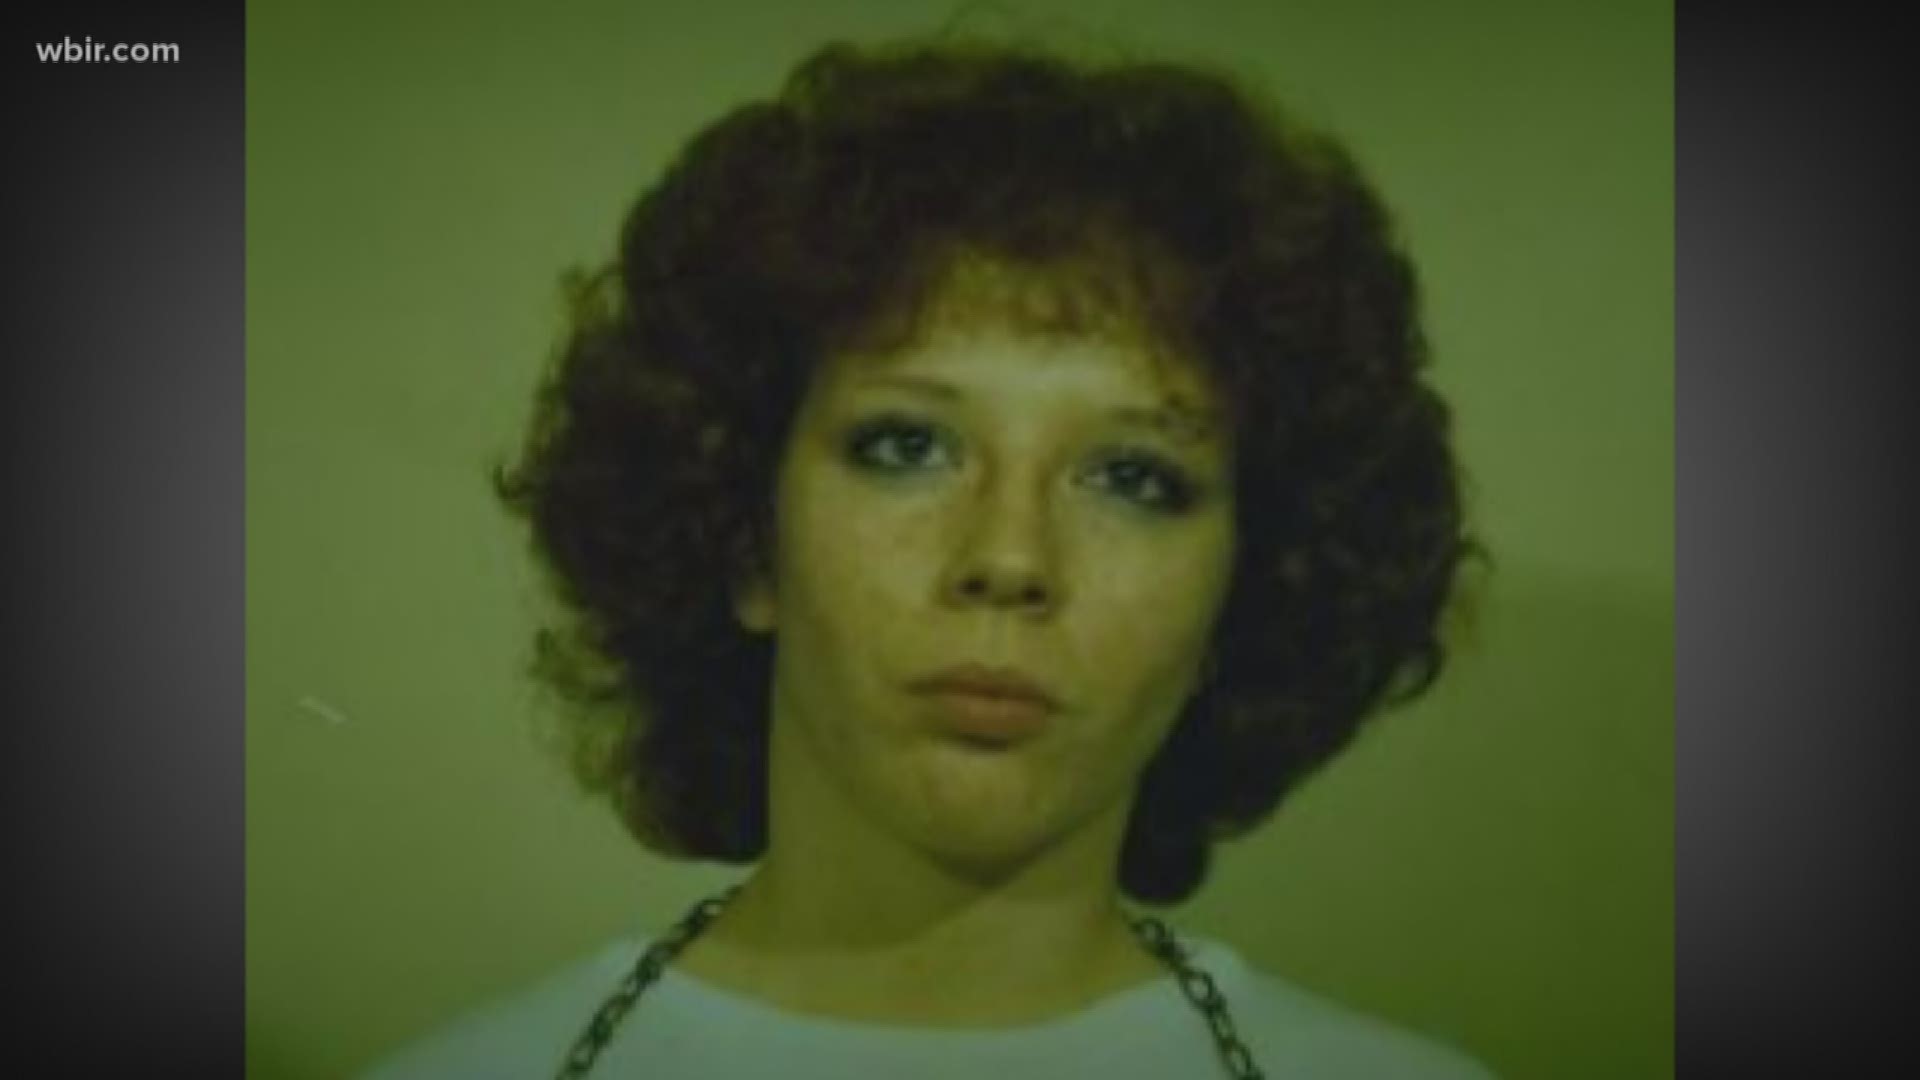 TBI identified one suspect believed to have killed a woman in the Redhead Murder spree in the 80s. There's no evidence yet tying him to all the crimes.